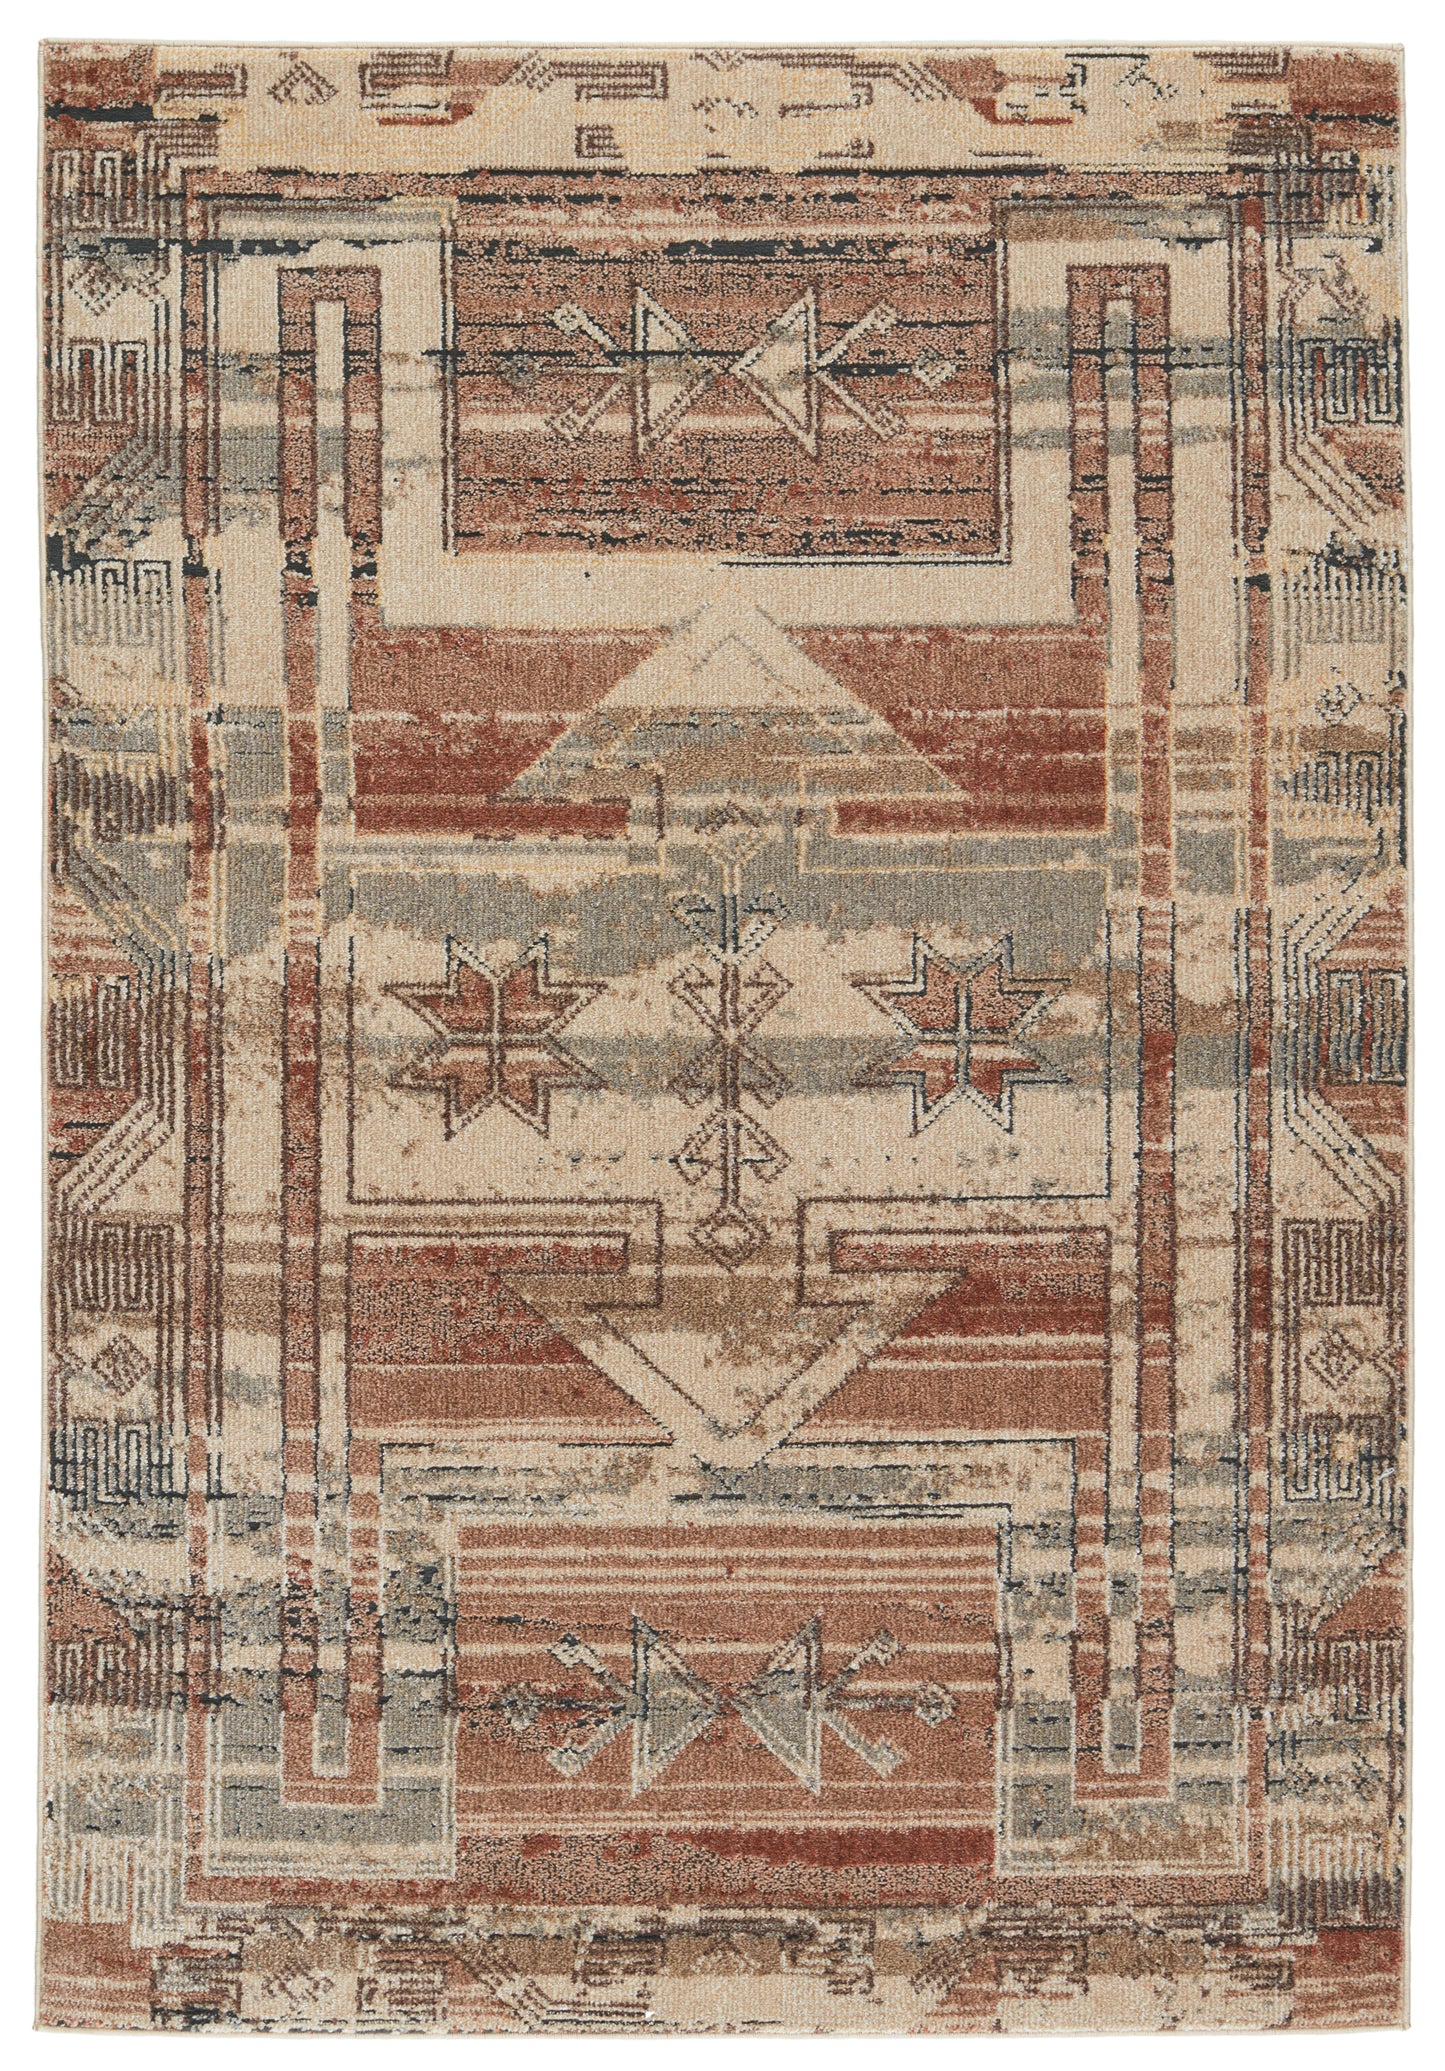 Cirque Arvo Machine Made Synthetic Blend Indoor Area Rug From Jaipur Living